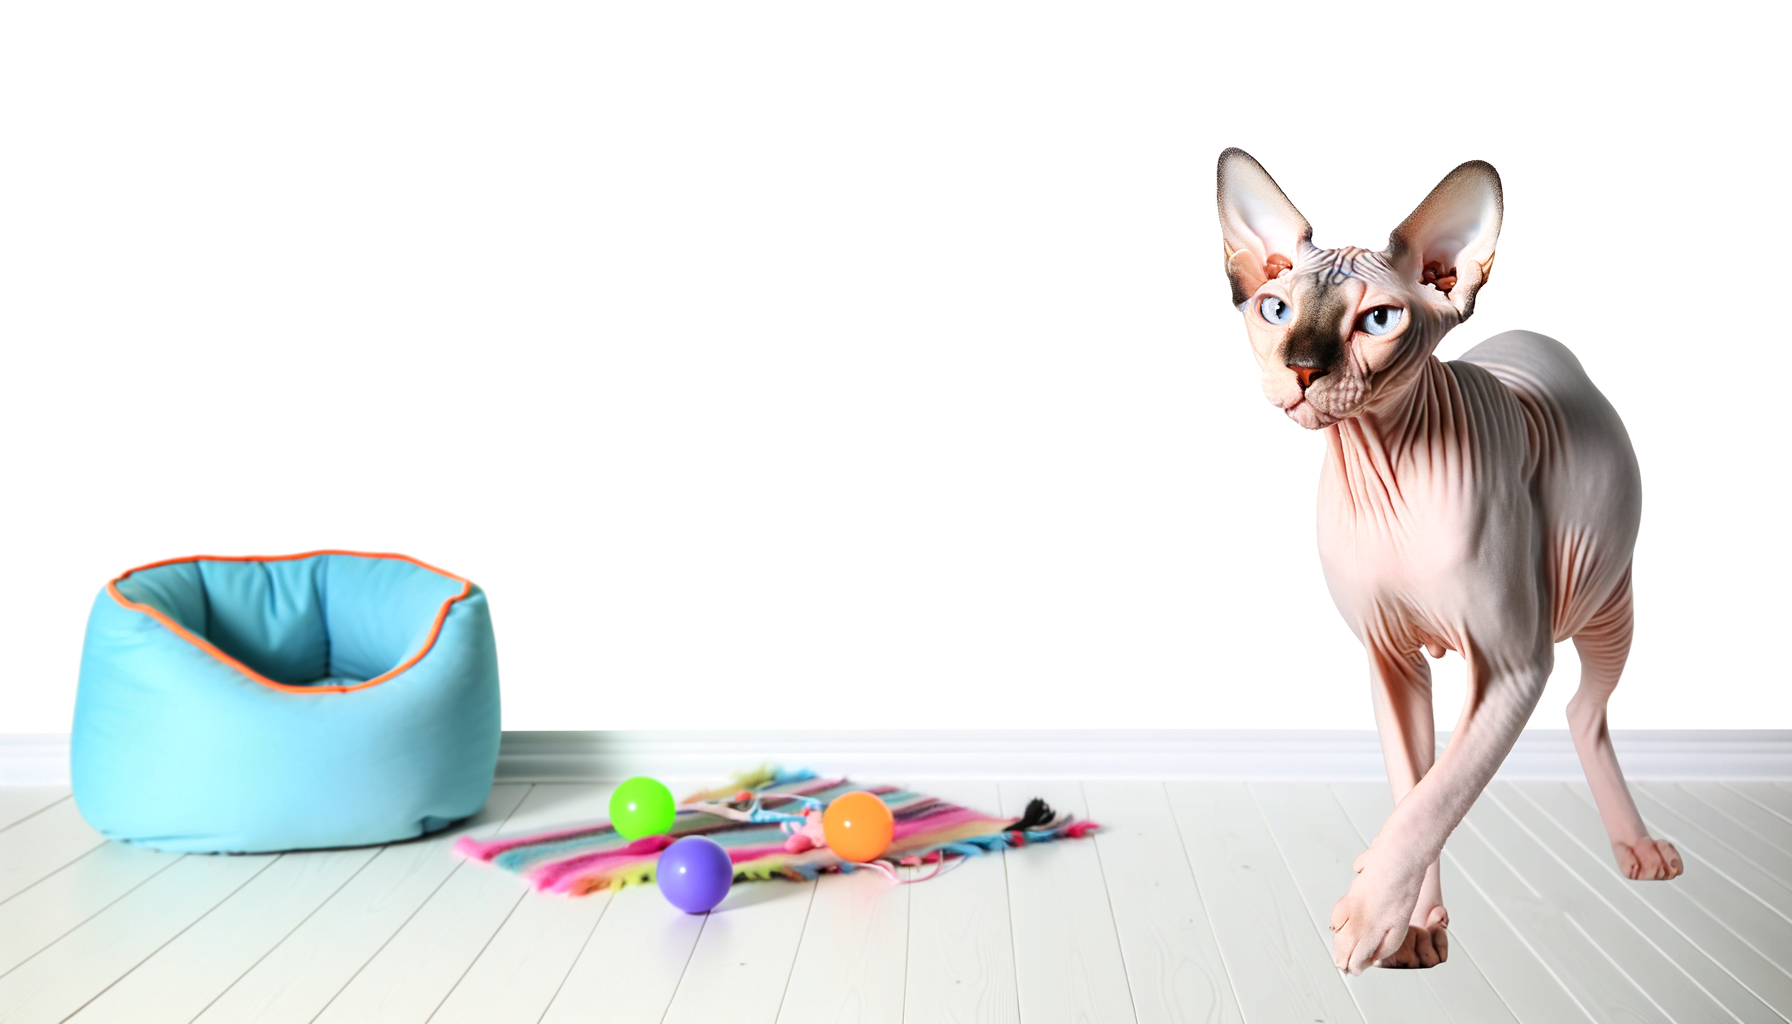 "Dispelling Myths: Do Hairless Cats Really Defecate on Walls?"